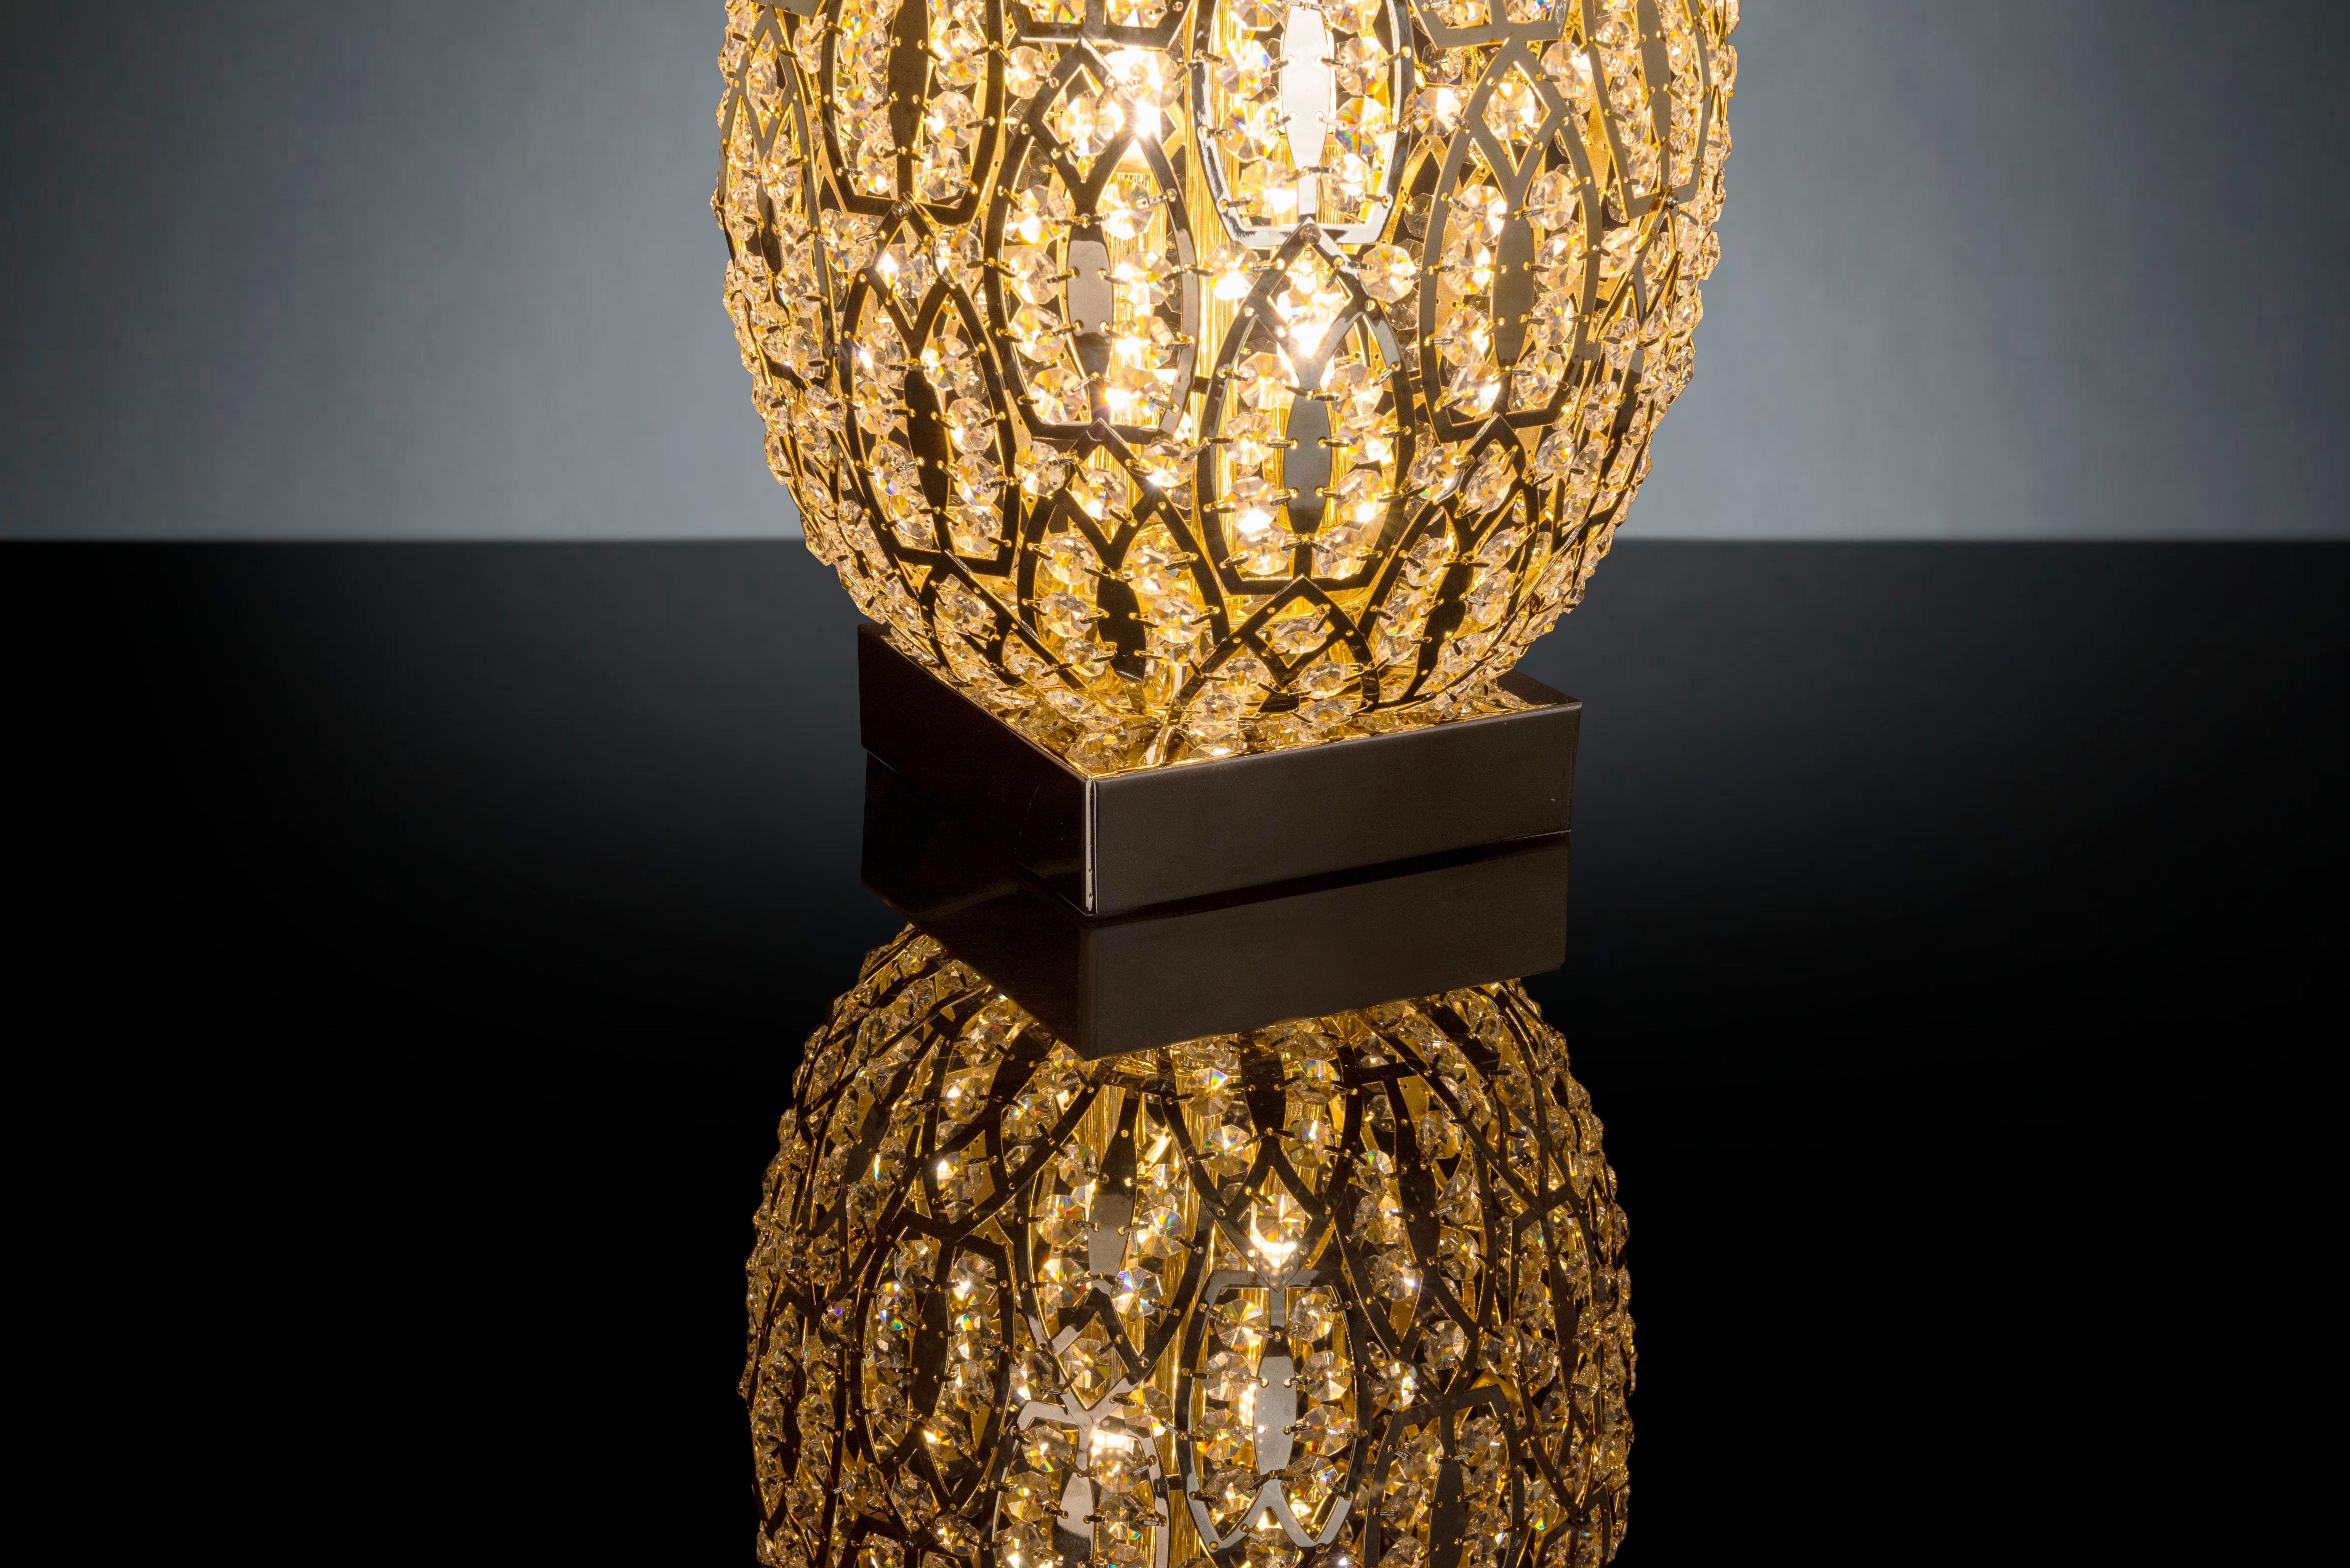 Egg Medium 1 Table Lamp, Black Nickel & 24k Gold Finish, Arabesque Style, Italy In New Condition For Sale In Treviso, Treviso